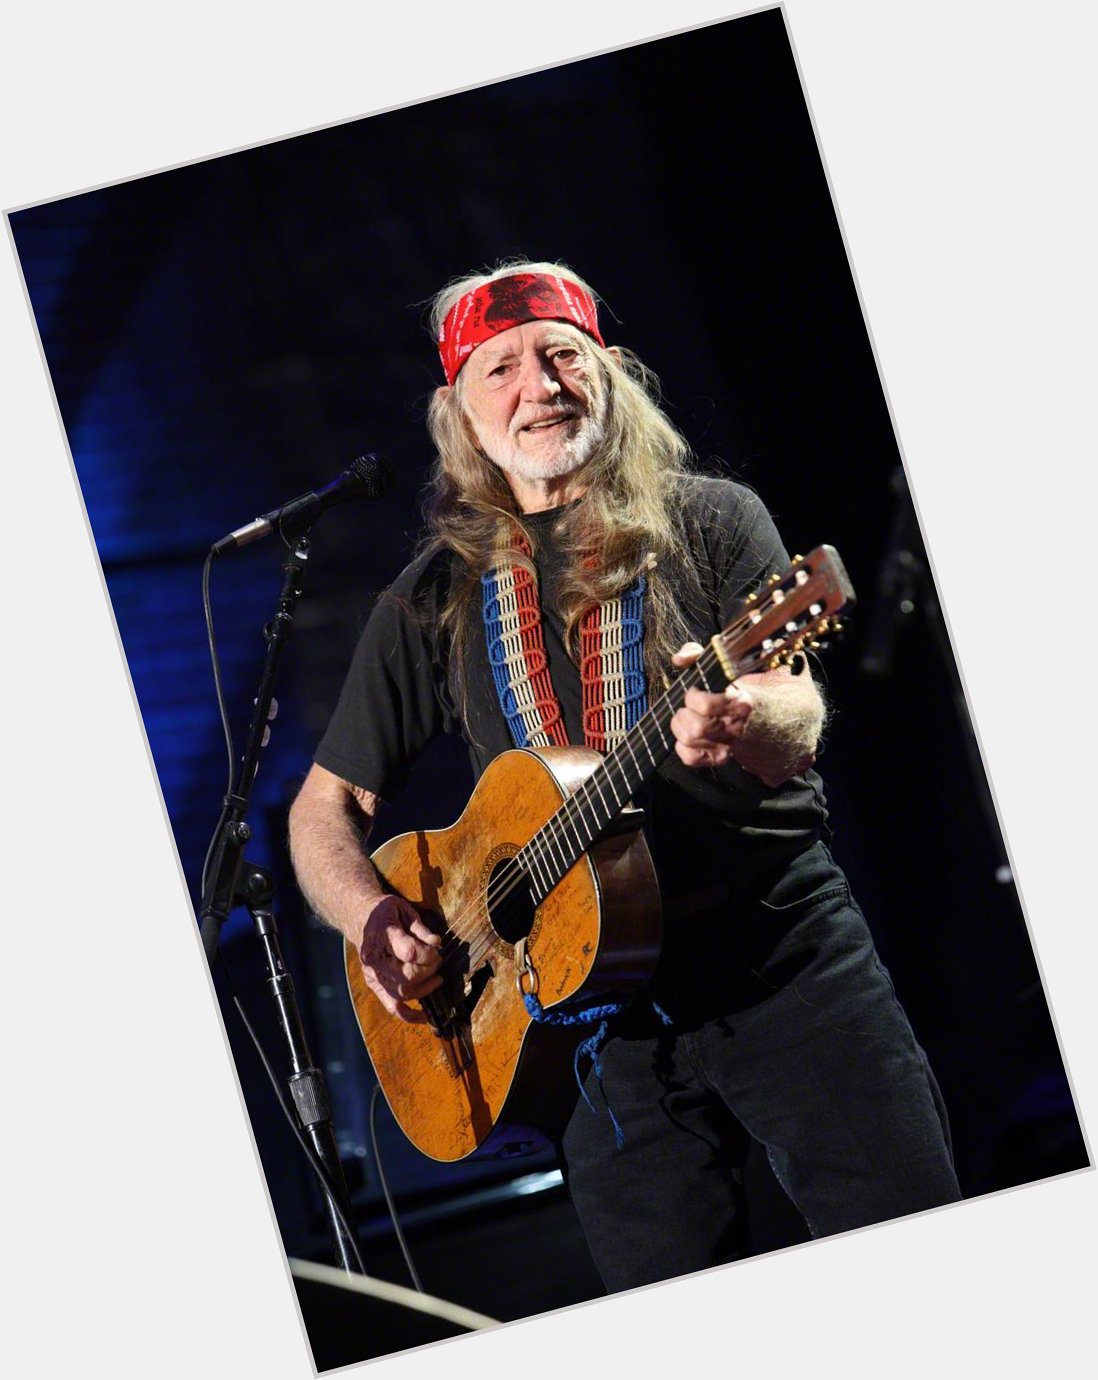 And national treasure! Happy birthday to Willie Nelson, a true Texas legend! 